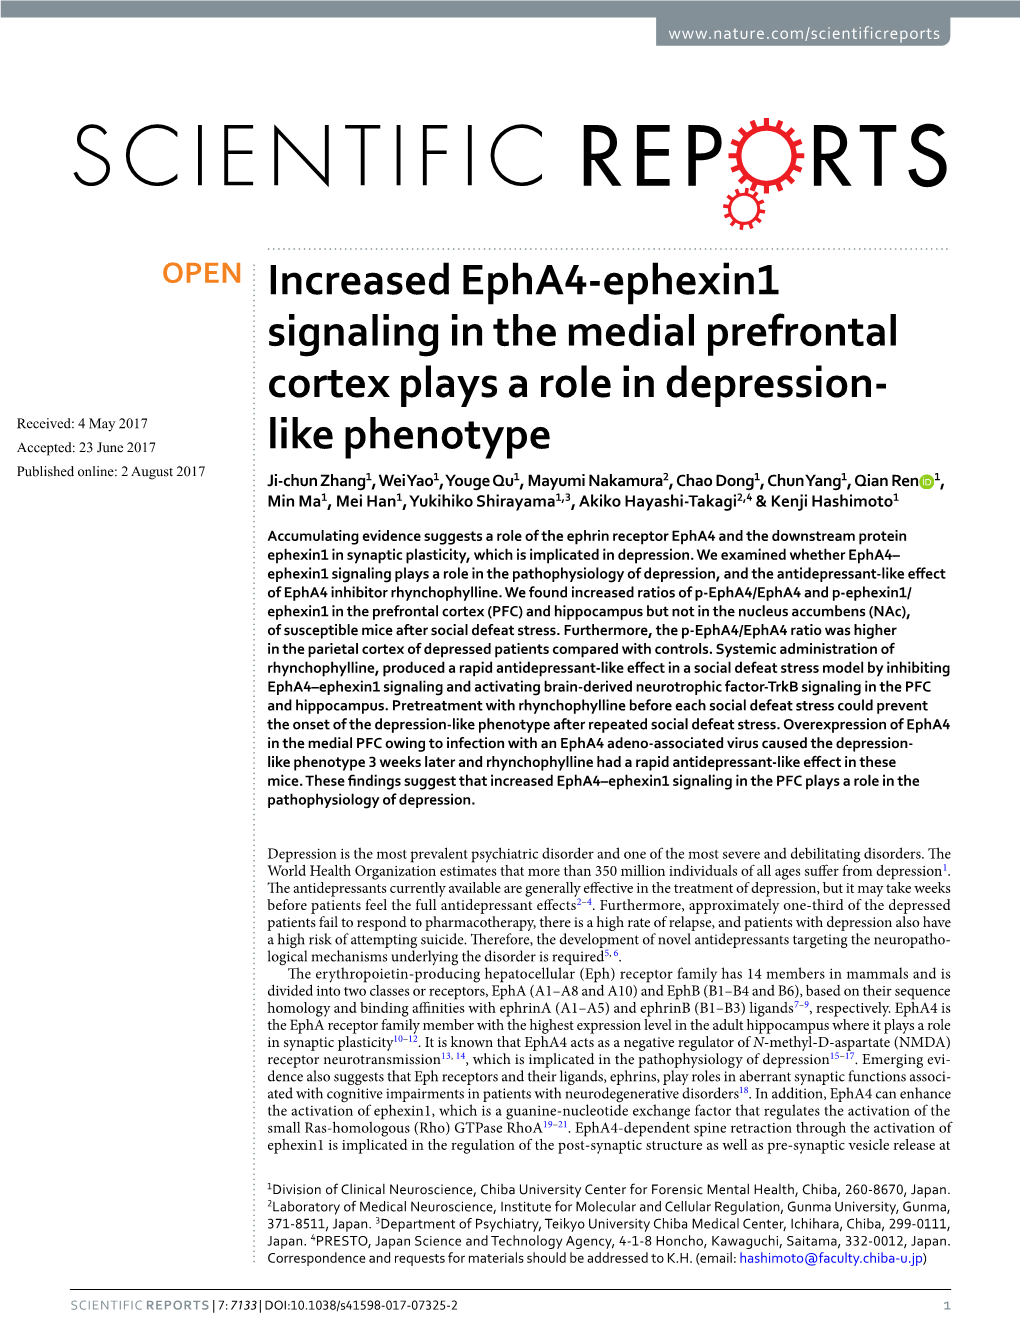 Increased Epha4-Ephexin1 Signaling in the Medial Prefrontal Cortex Plays a Role in Depression-Like Phenotype